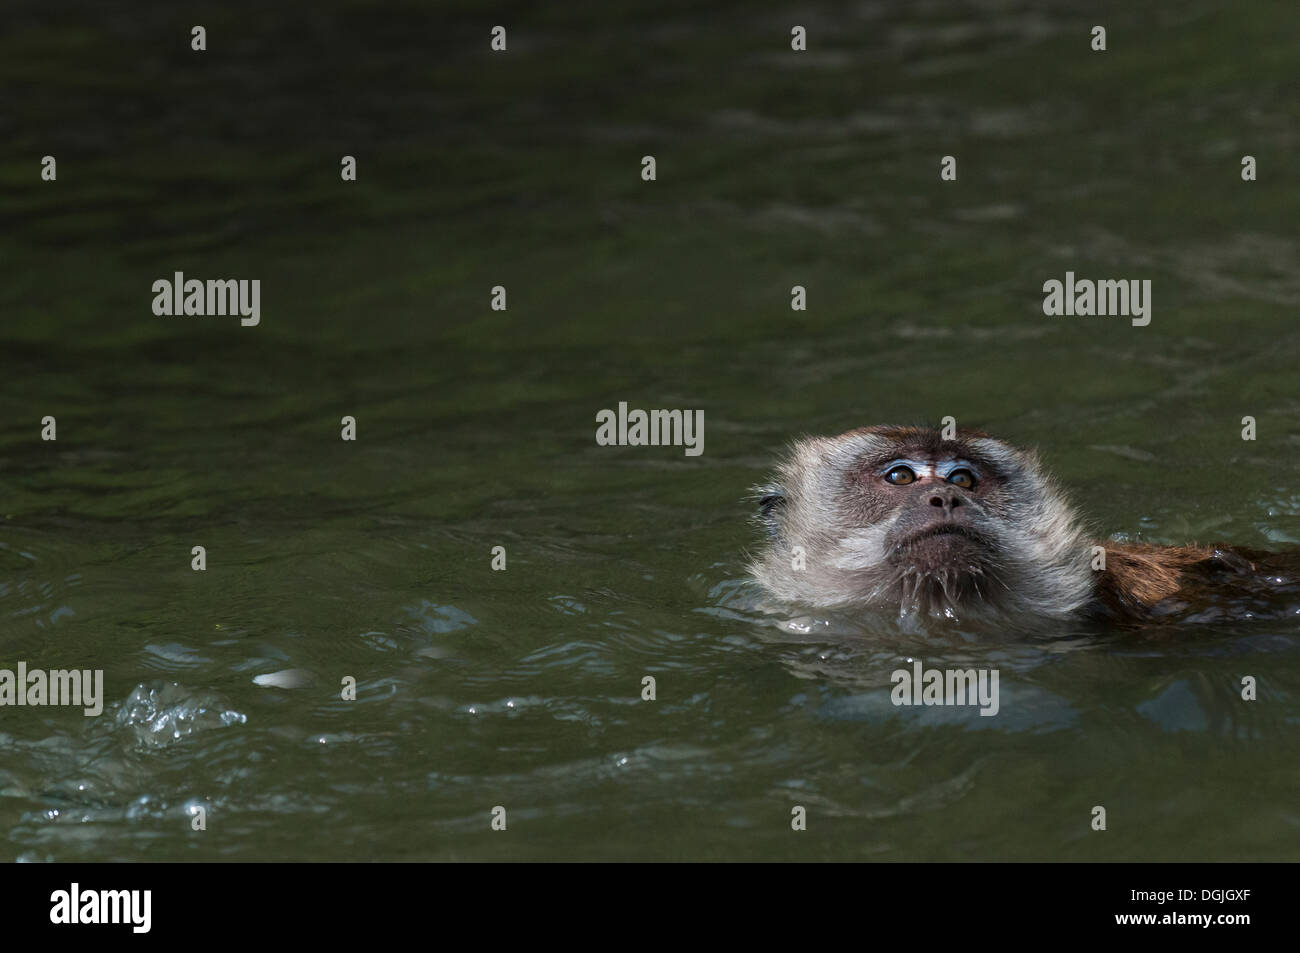 A Macaque monkey swimming. Stock Photo